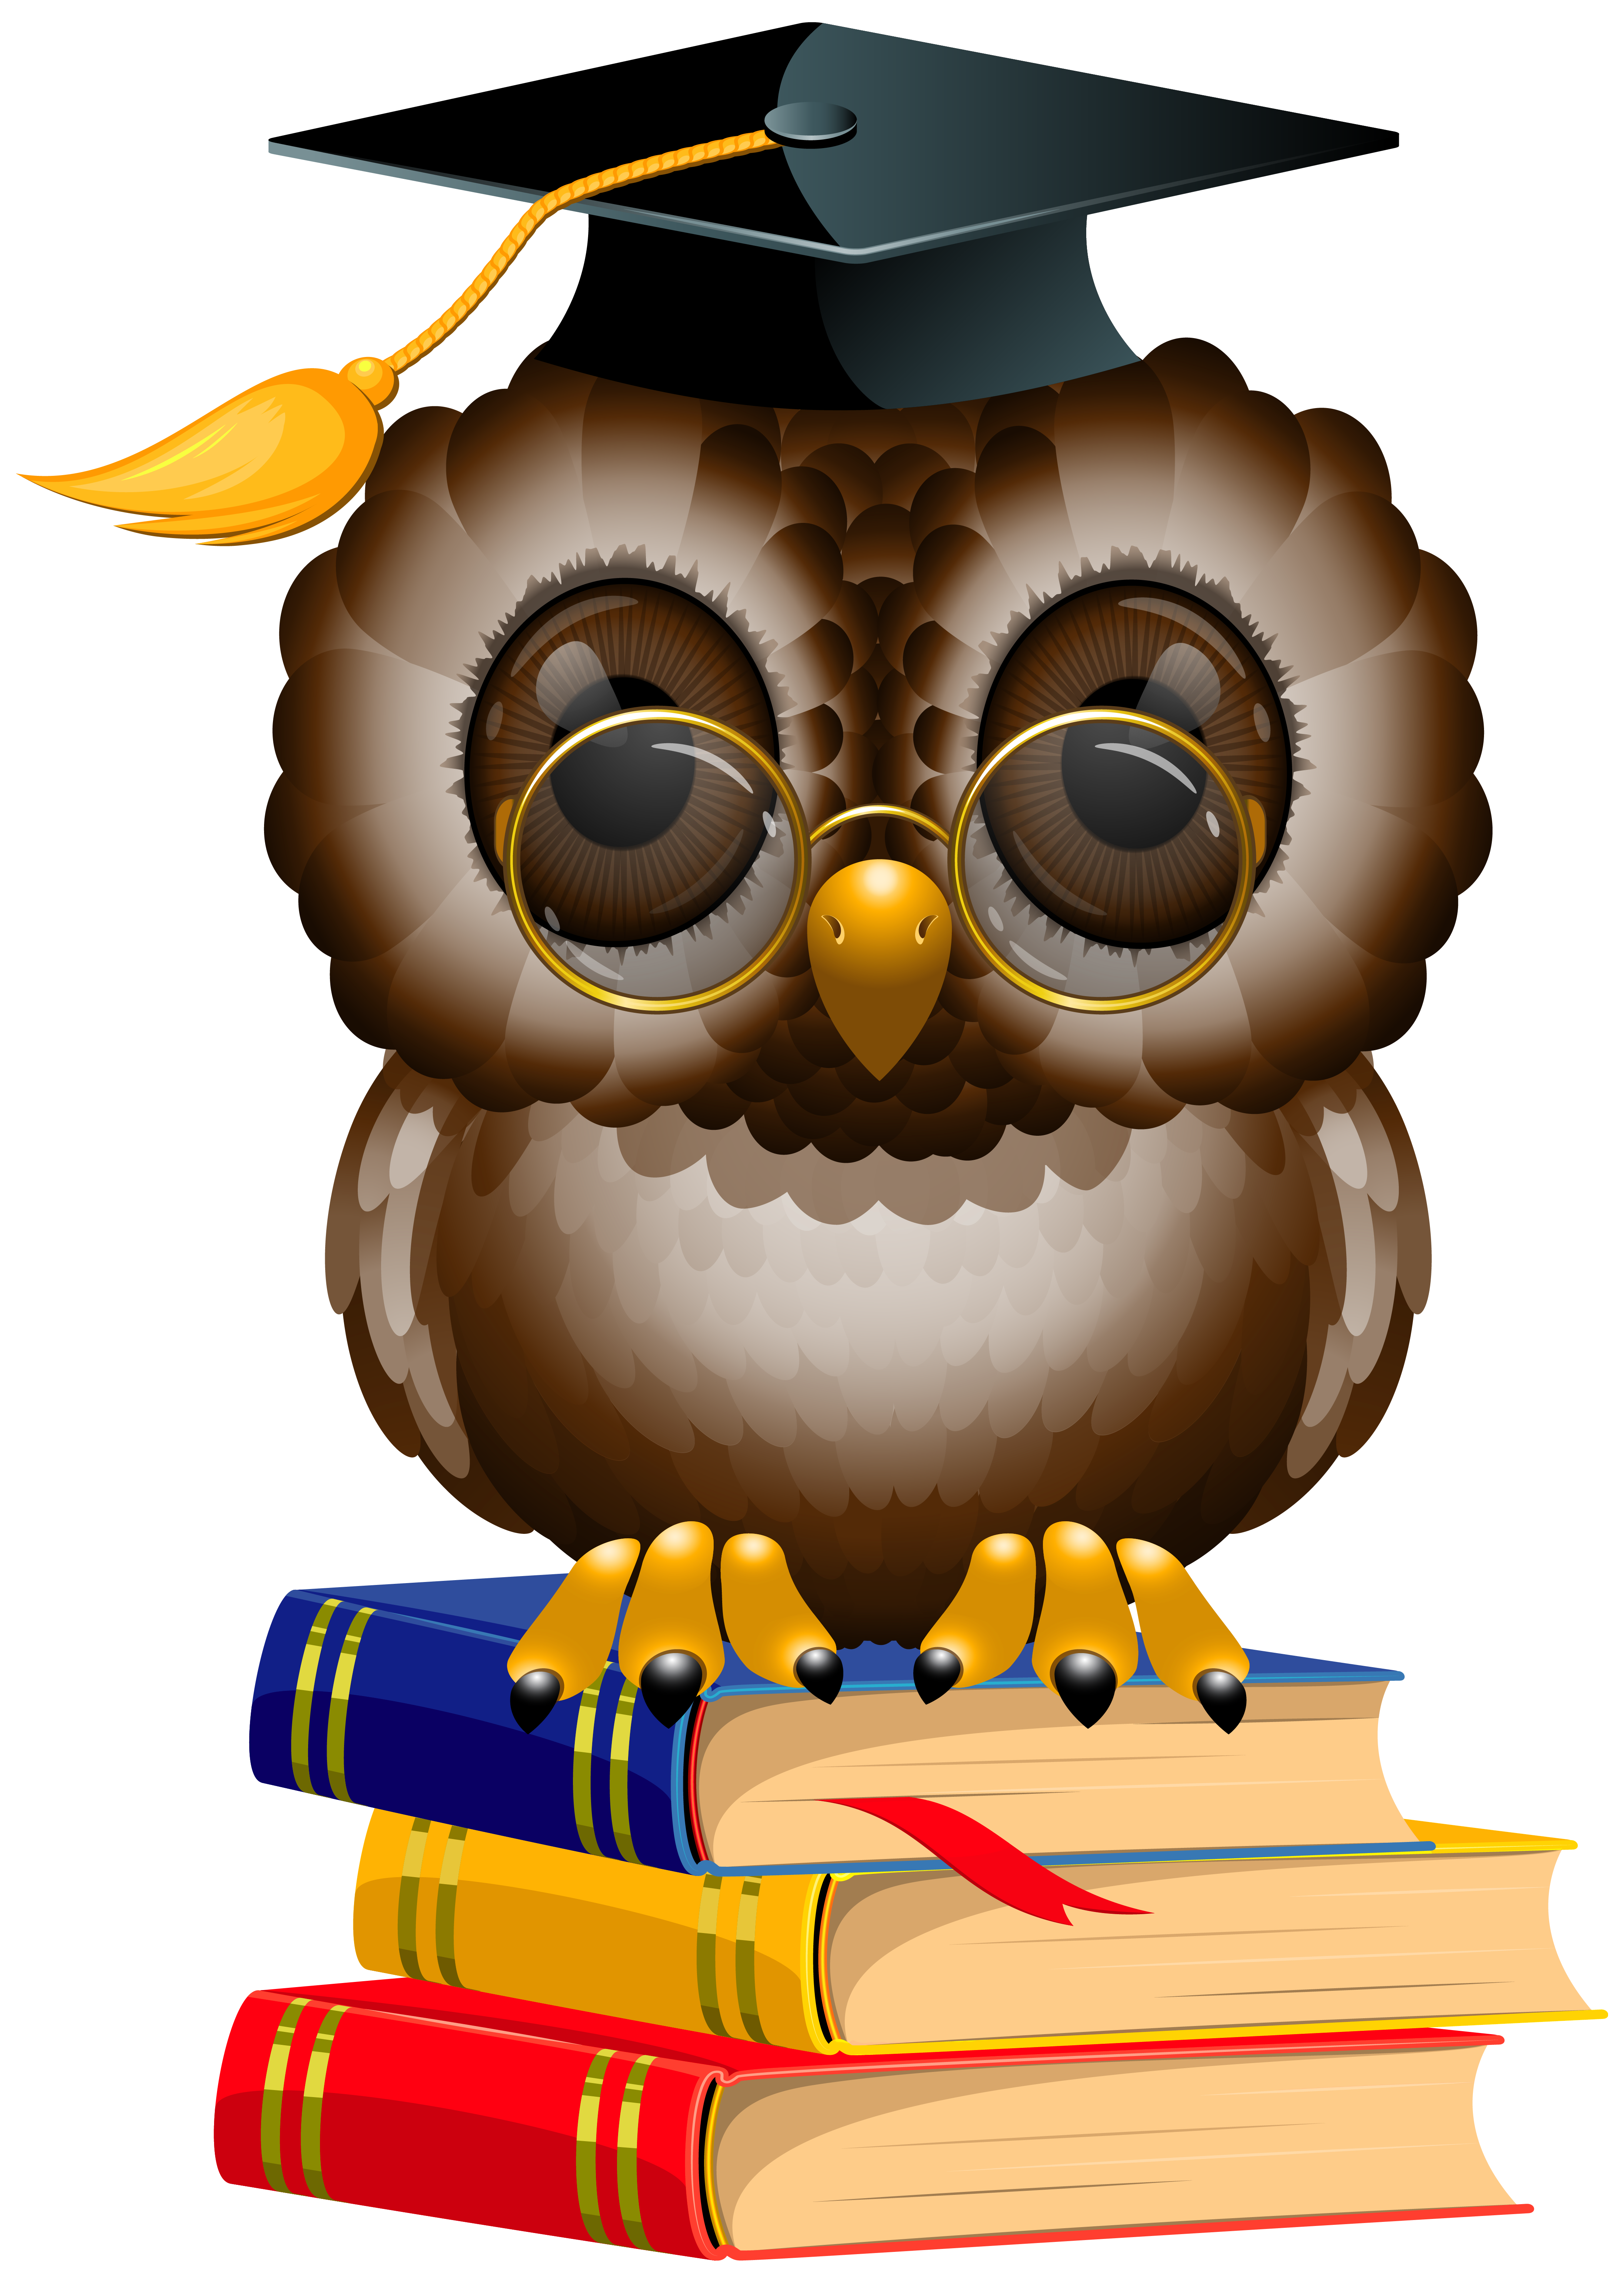 Graduate clipart owl. Wise drinkery cookhouse cafe